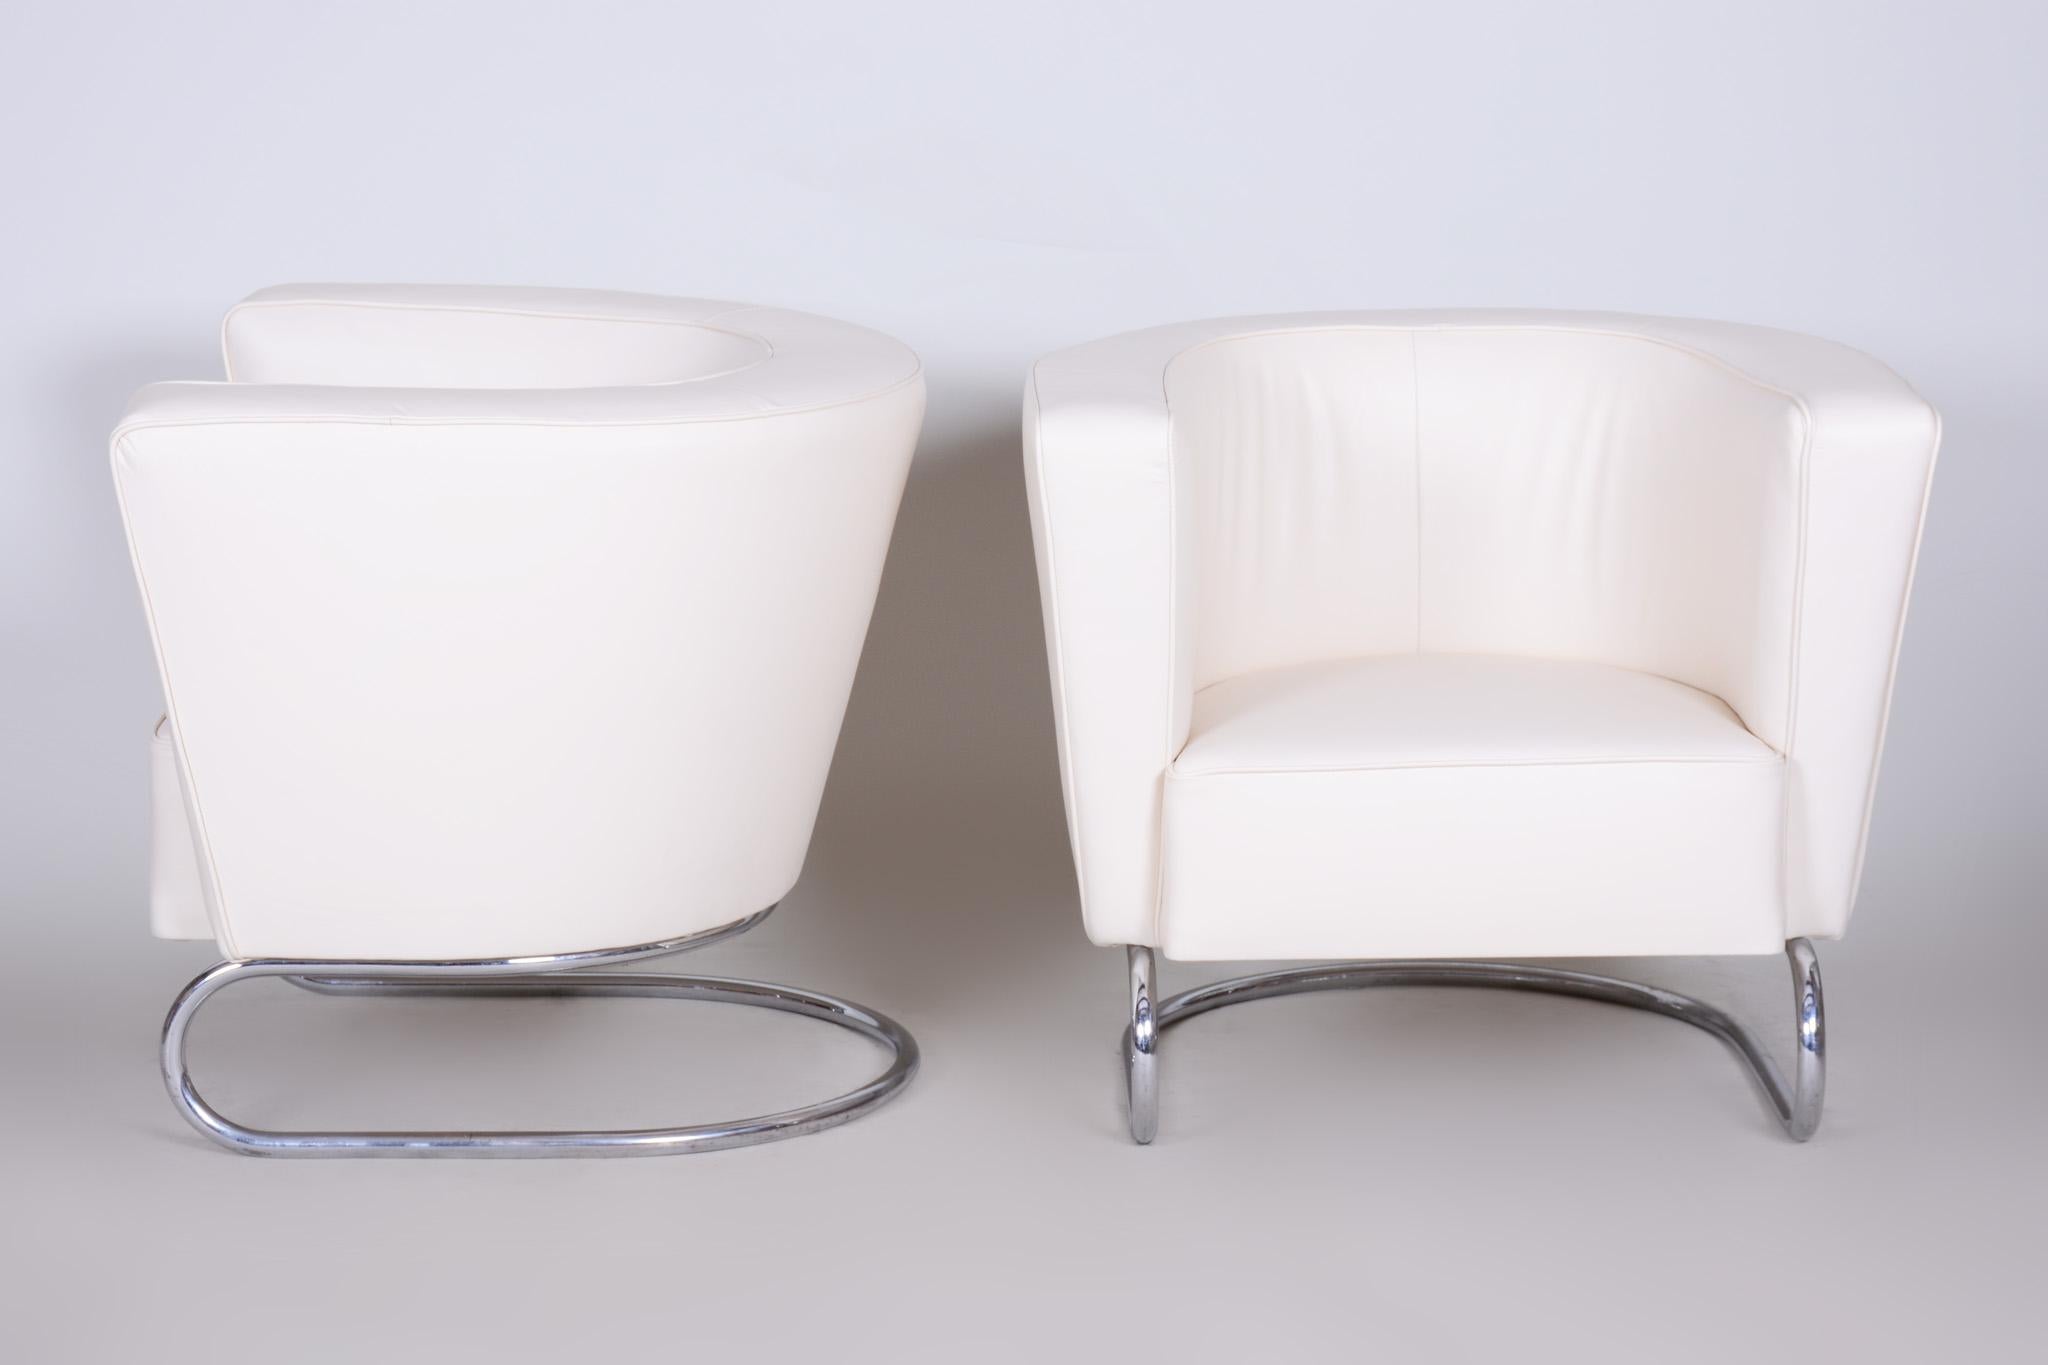 Chrome Pair of White Art Deco Armchairs from Czechoslovakia by Jindrich Halabala, 1930s For Sale